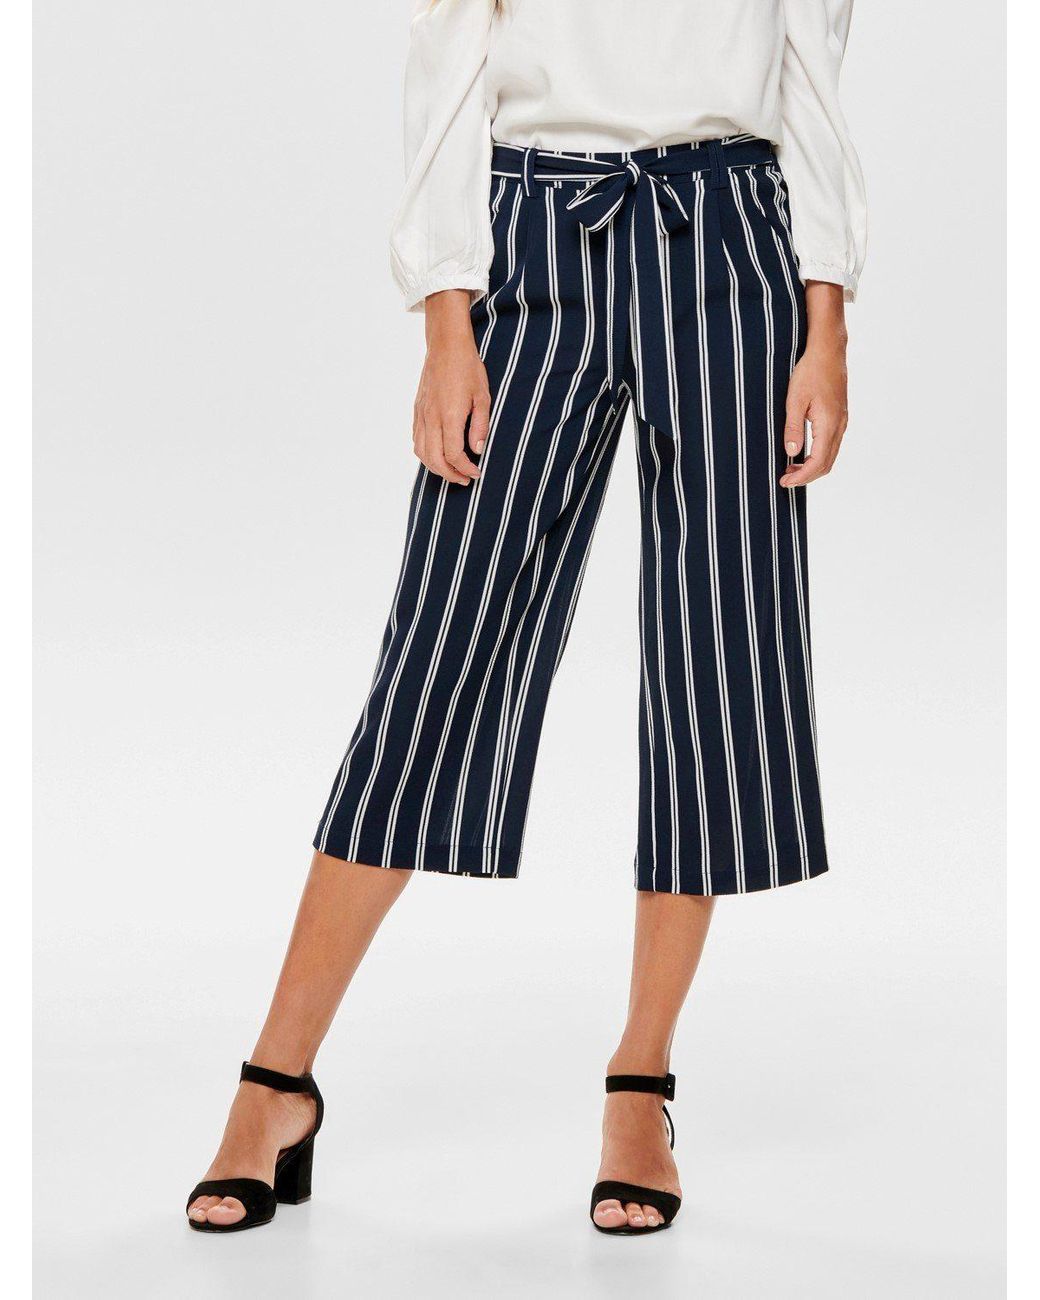 PTM | DE NOOS CULOTTE in PANT Stoffhose ONLWINNER Blau ONLY Lyst PALAZZO